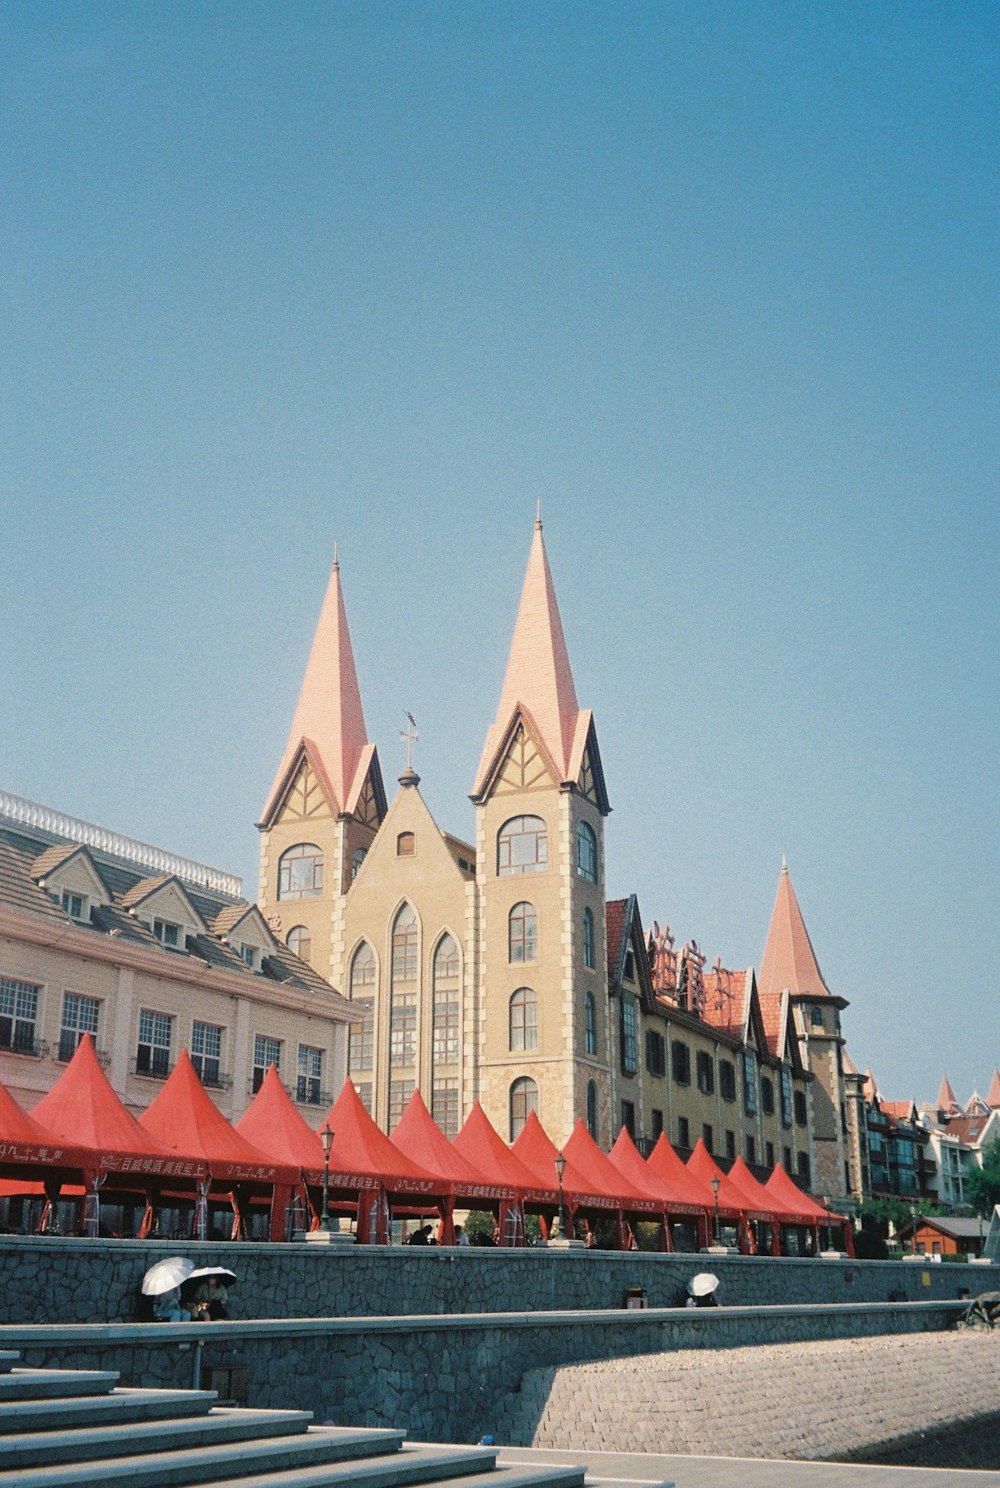 a large building with red tents in front of it